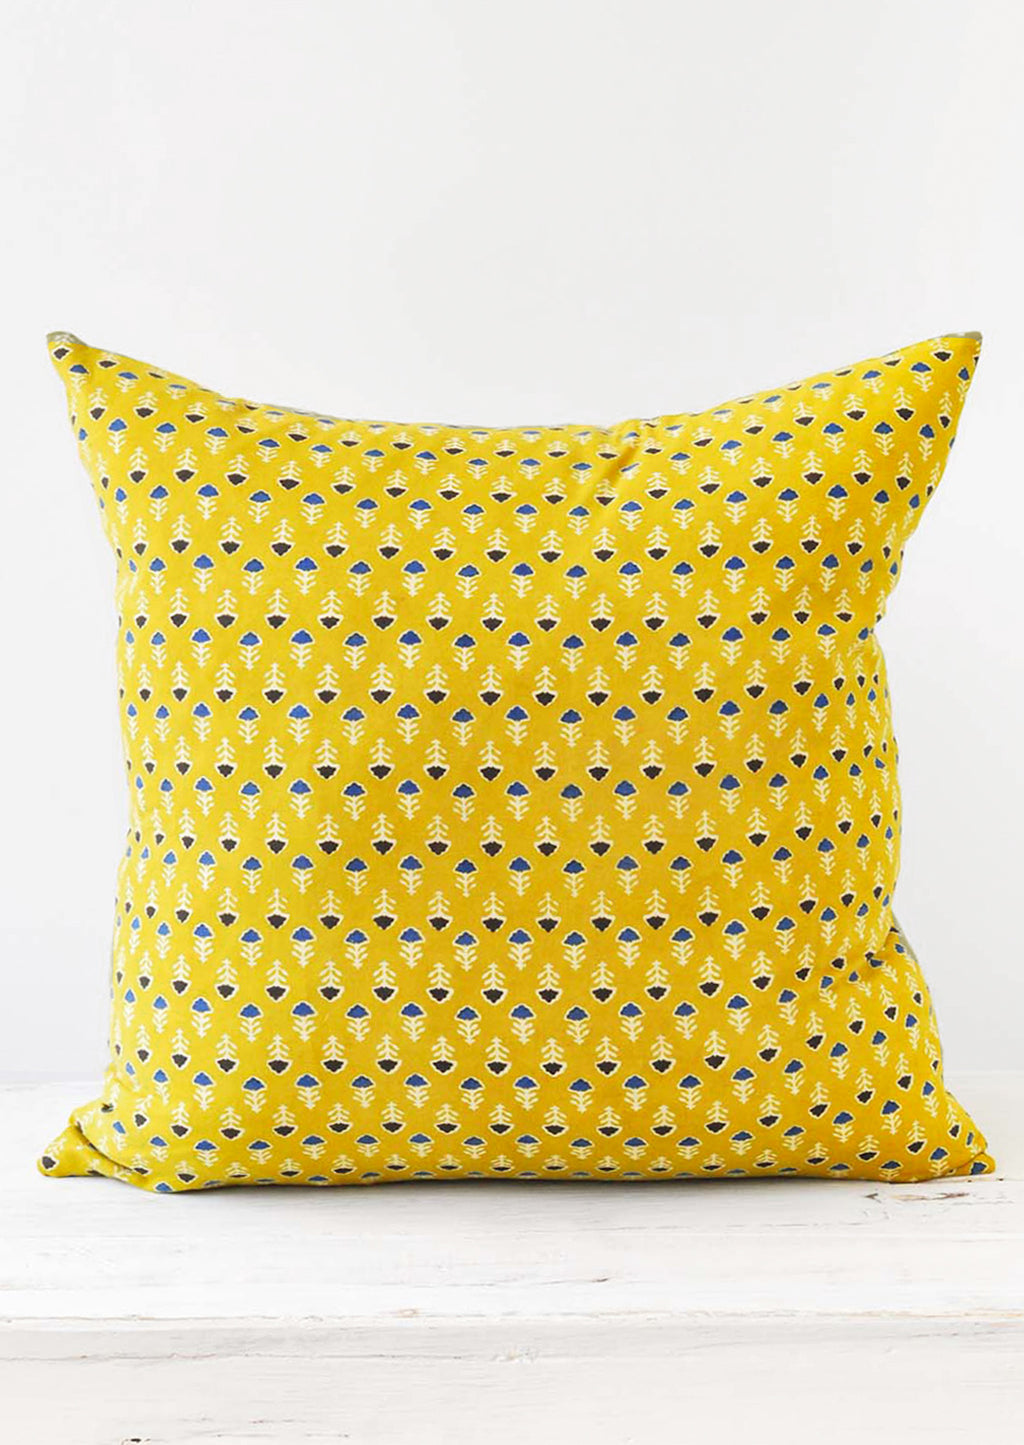 1: A block printed pillow with a yellow, blue, and white floral design.